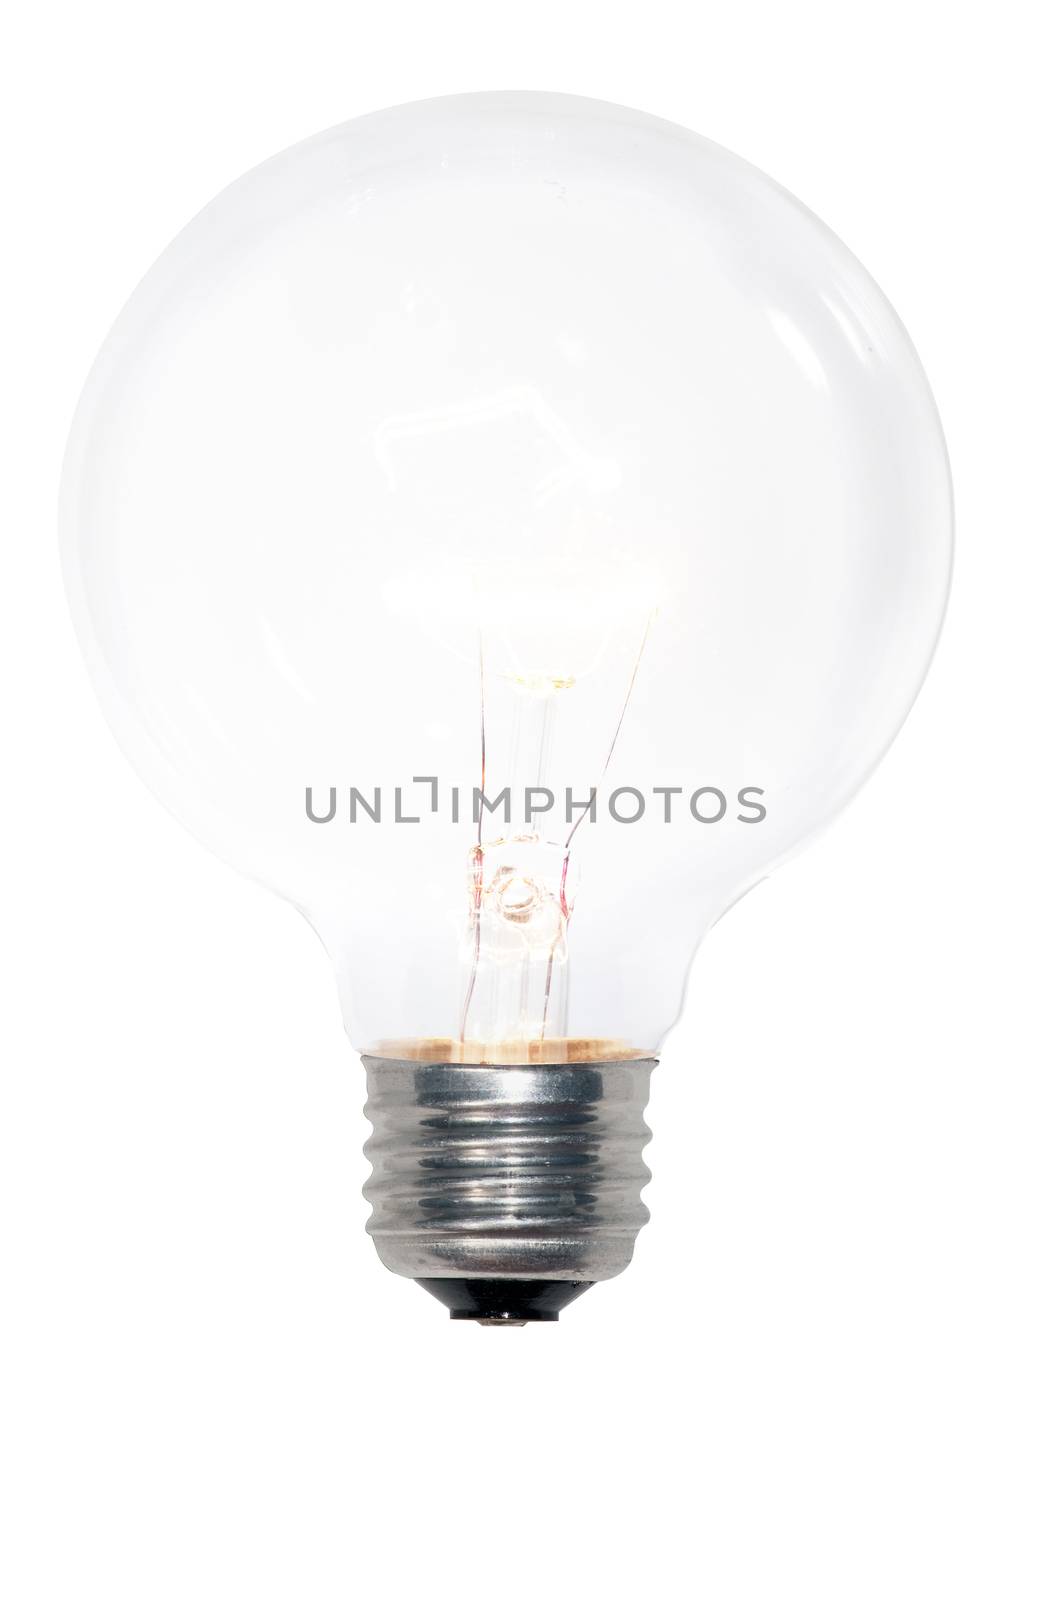 Lit lightbulb out of an electrical socket representing a new idea. Isolated on a white background